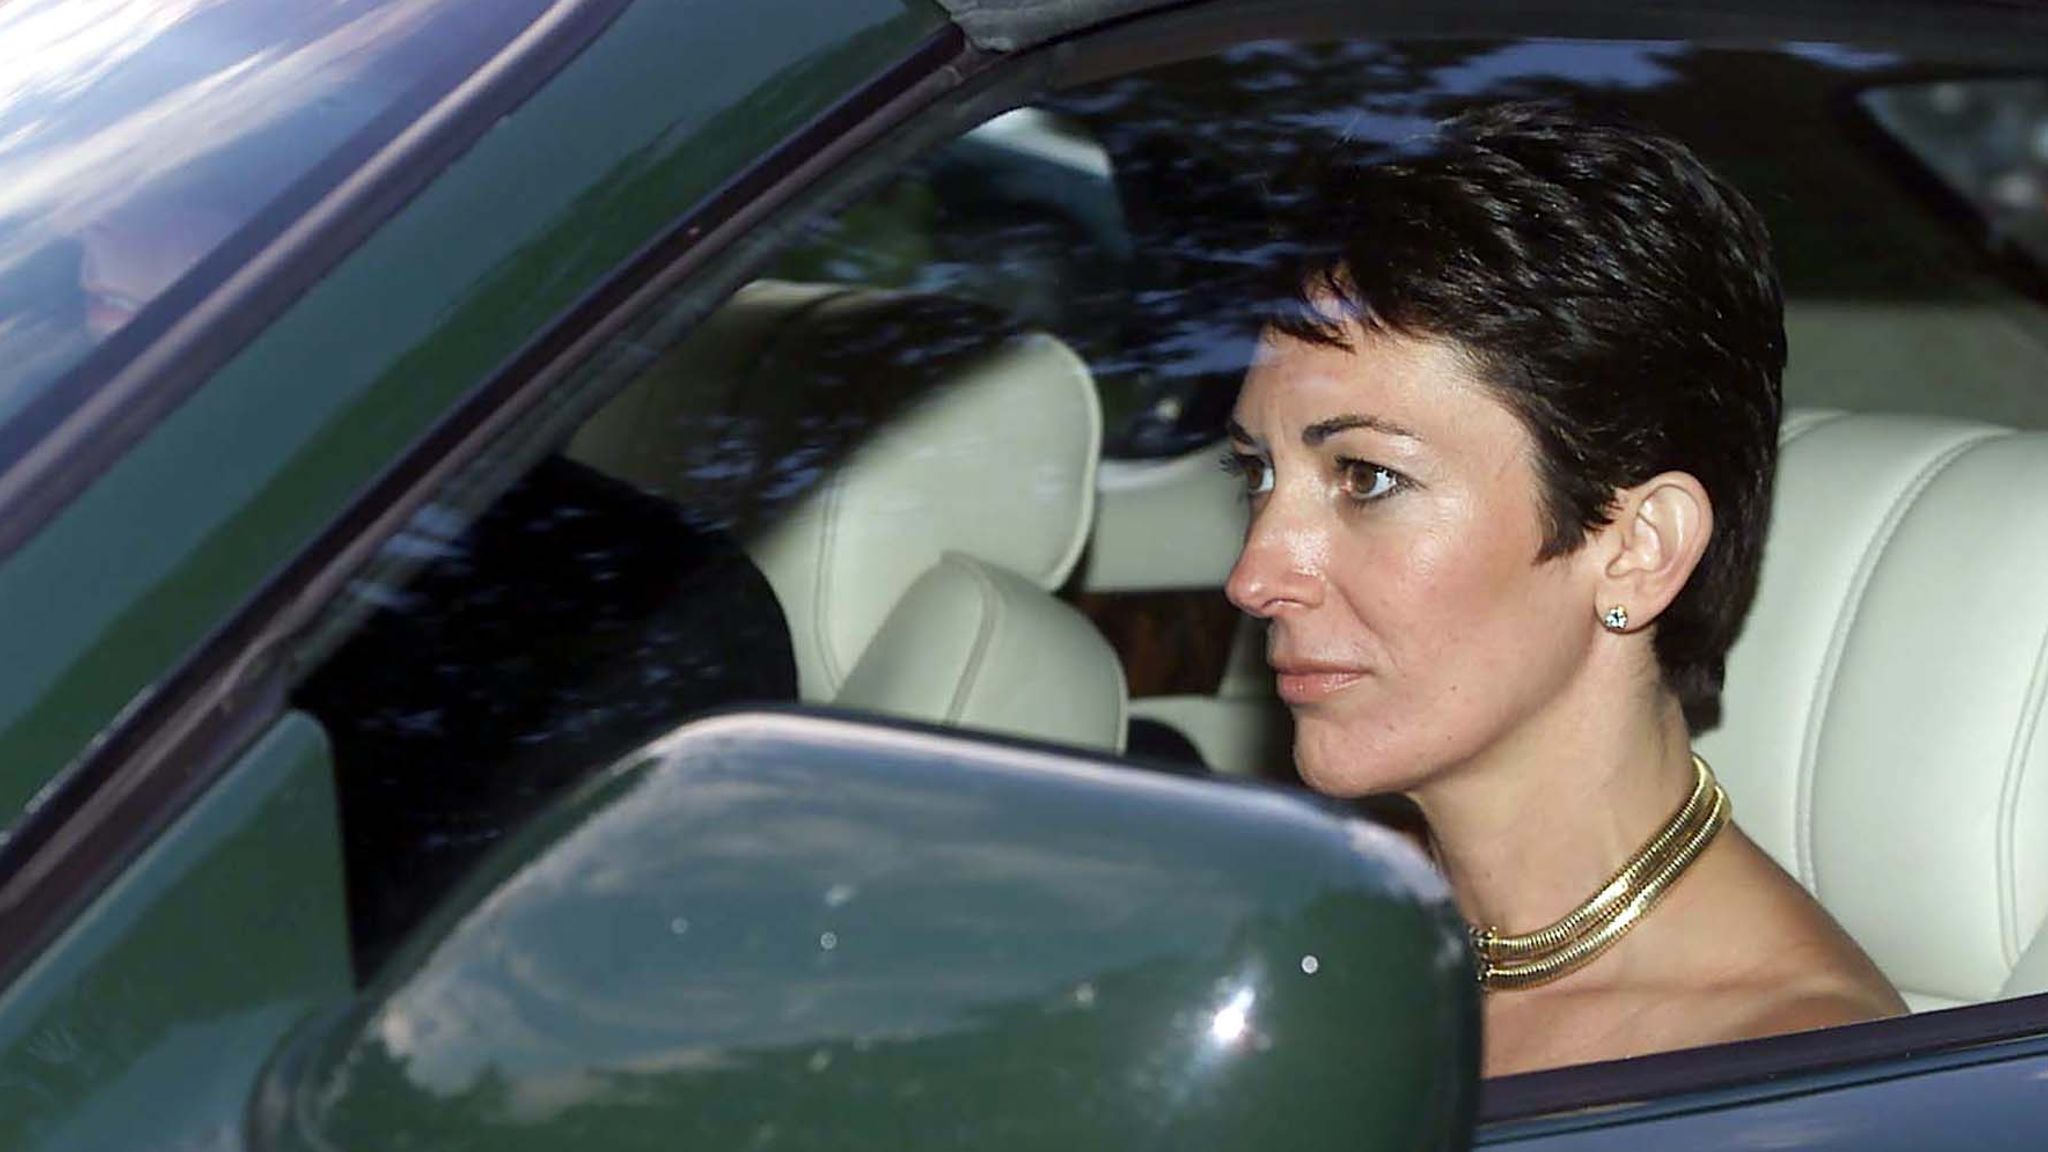 ghislaine maxwell is secretly married but has not revealed her partner s identity us prosecutors say us news sky news